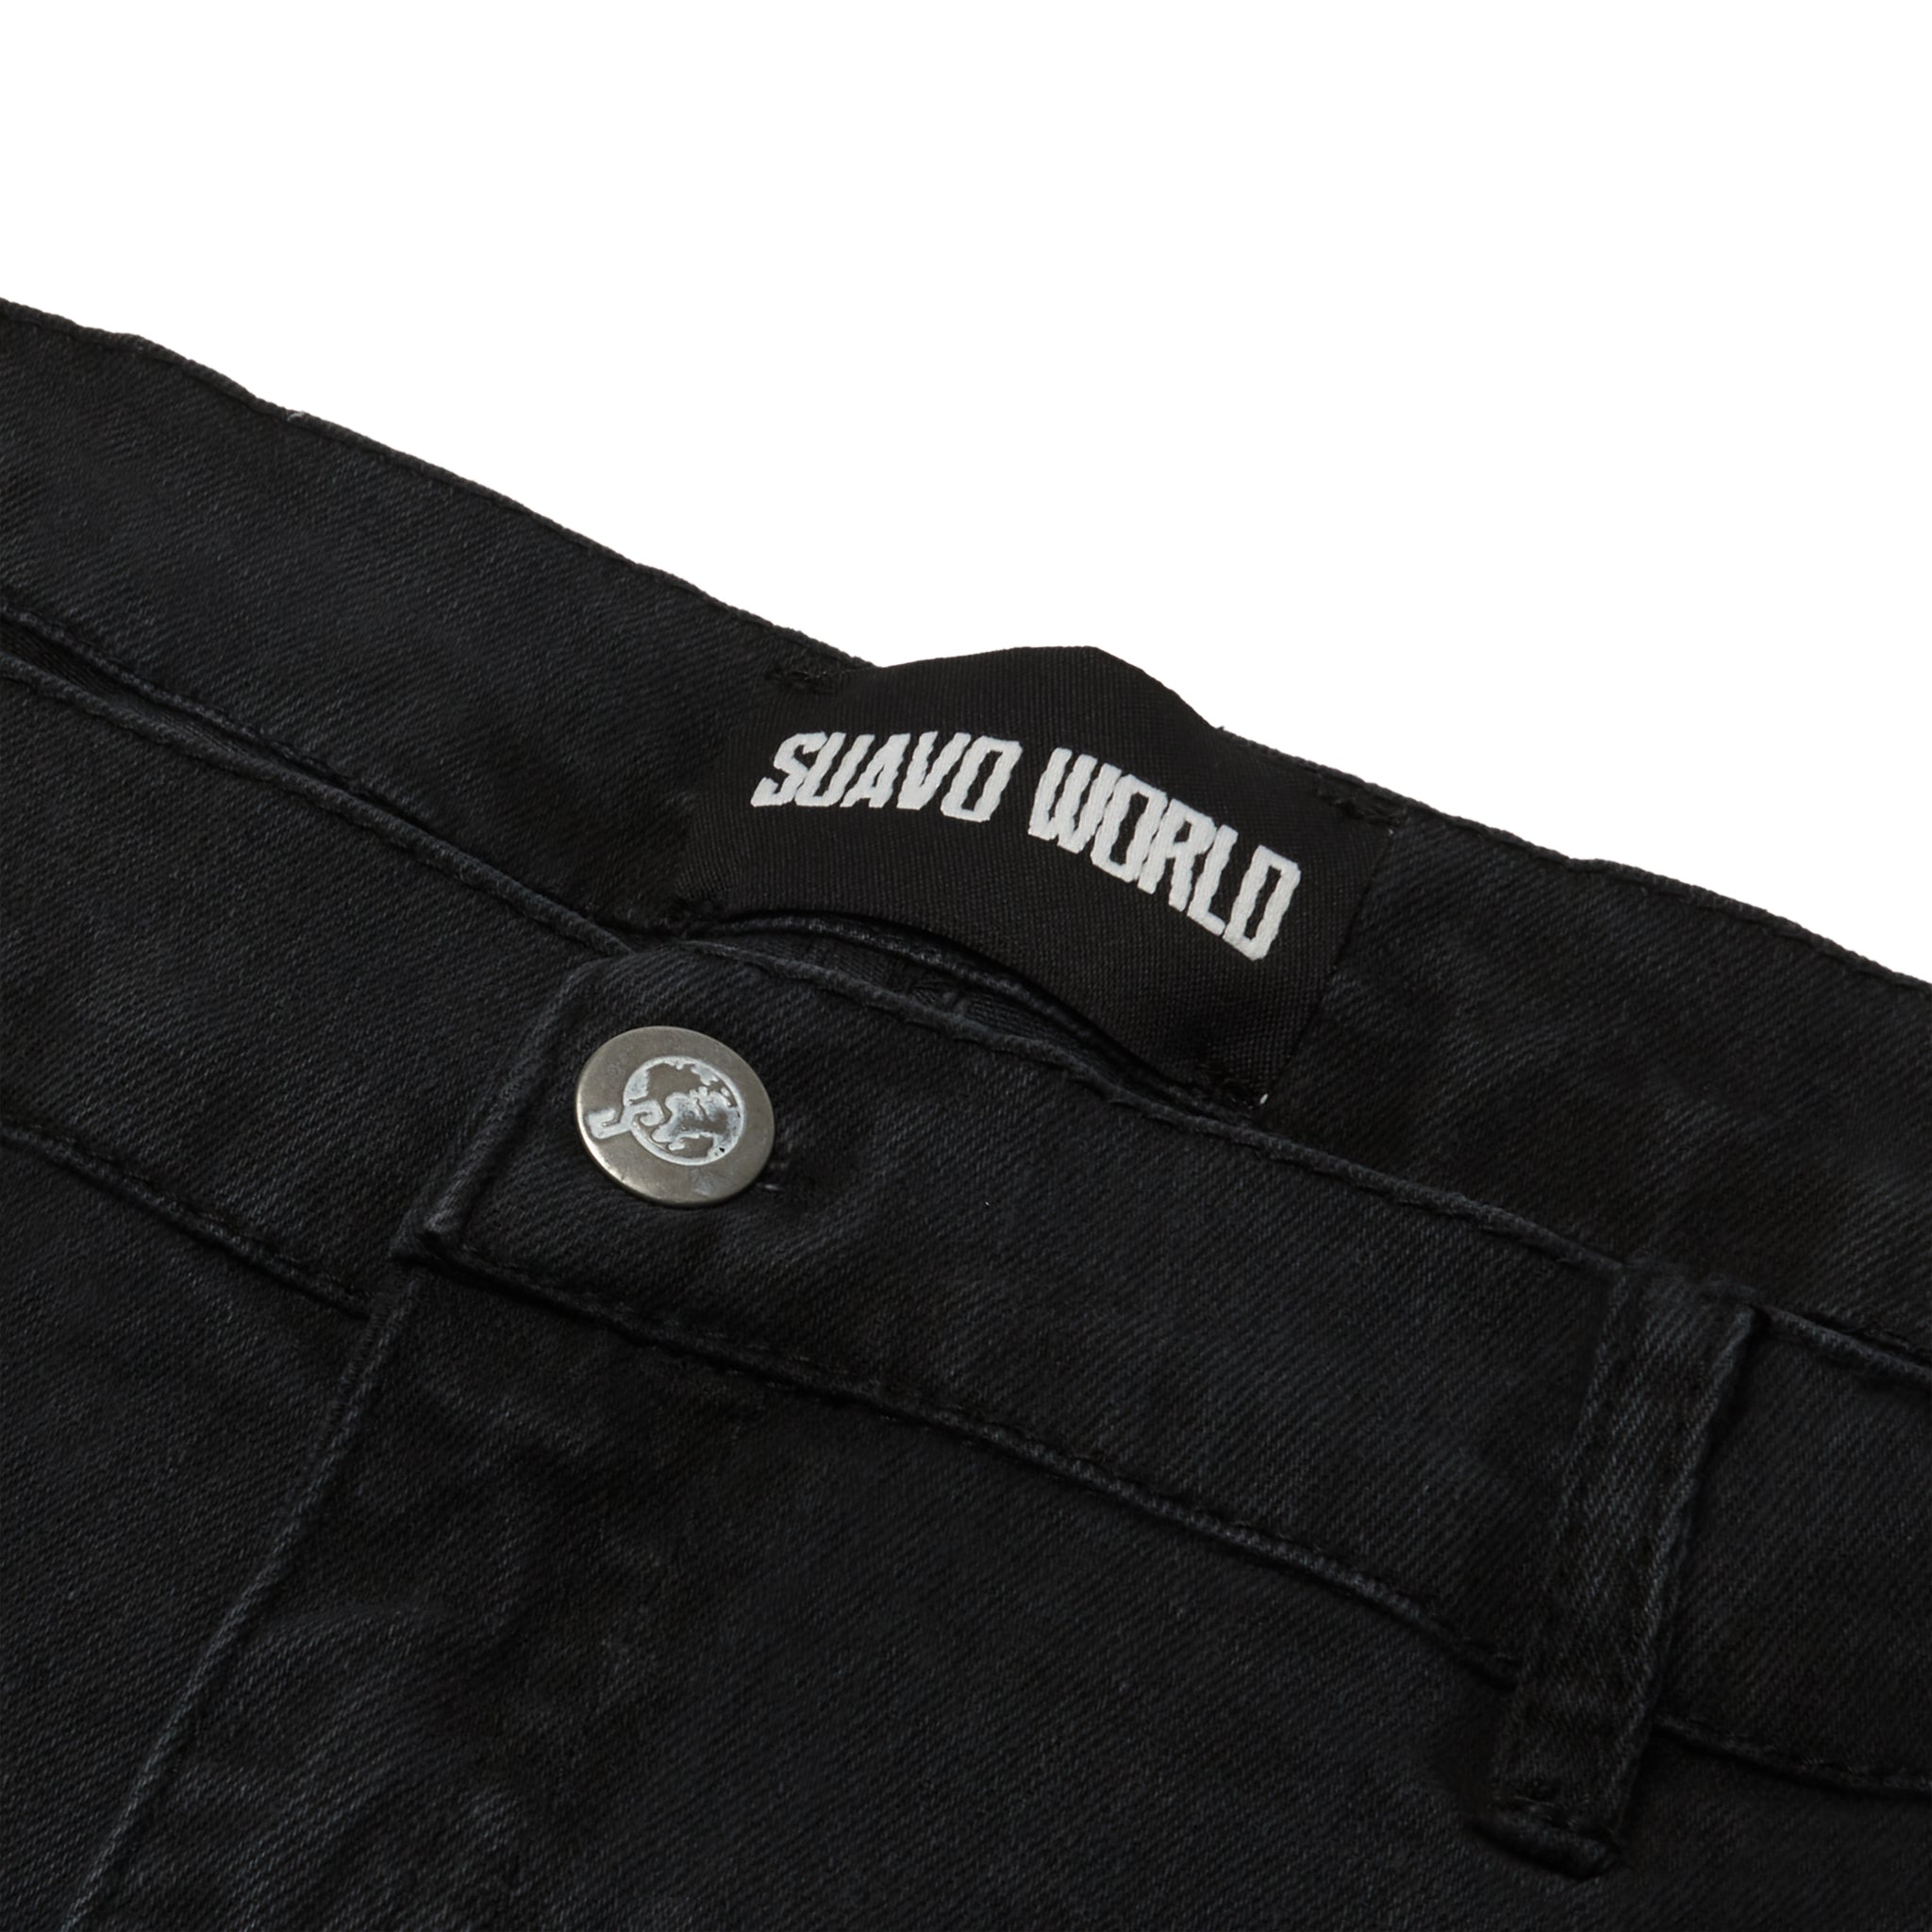 Tag view of Suavo World Flare Denim Washed Black